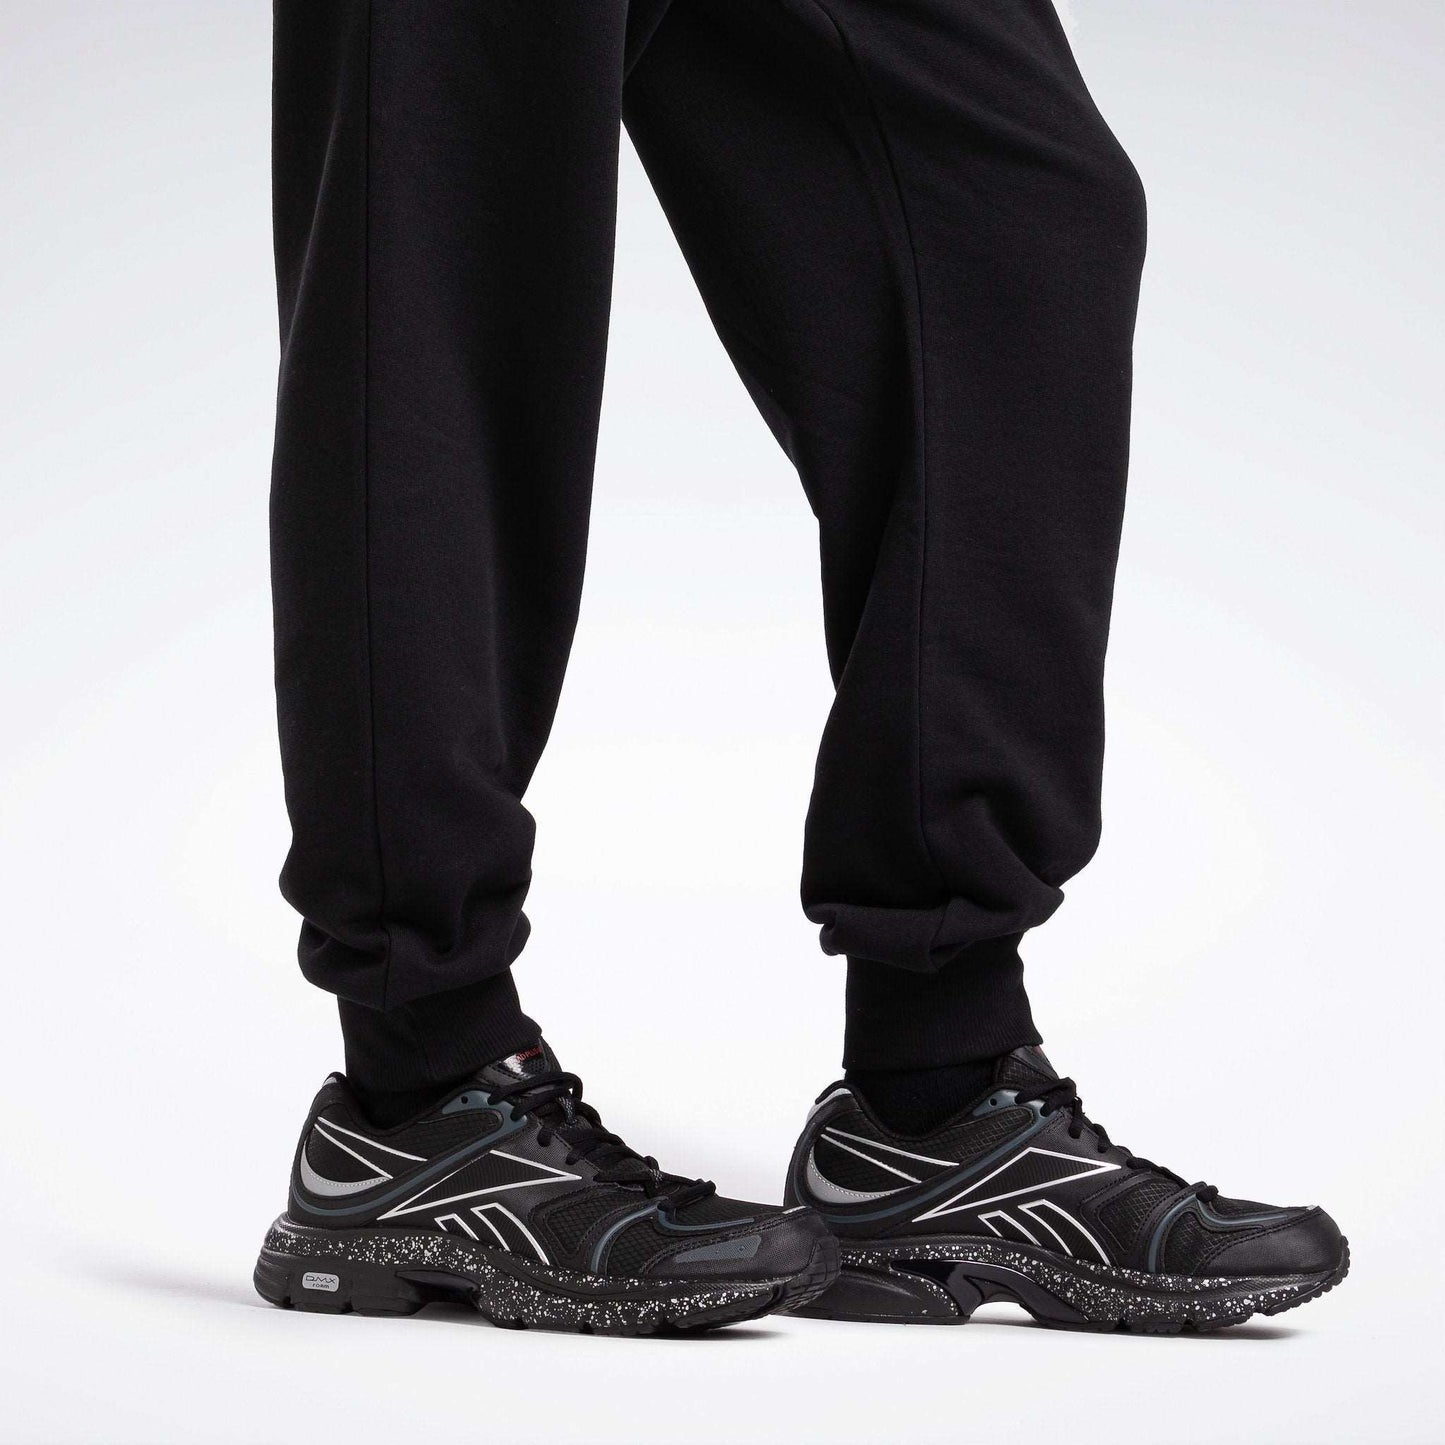 Reebok Classic Archive Essentials Fit French Terry Pants